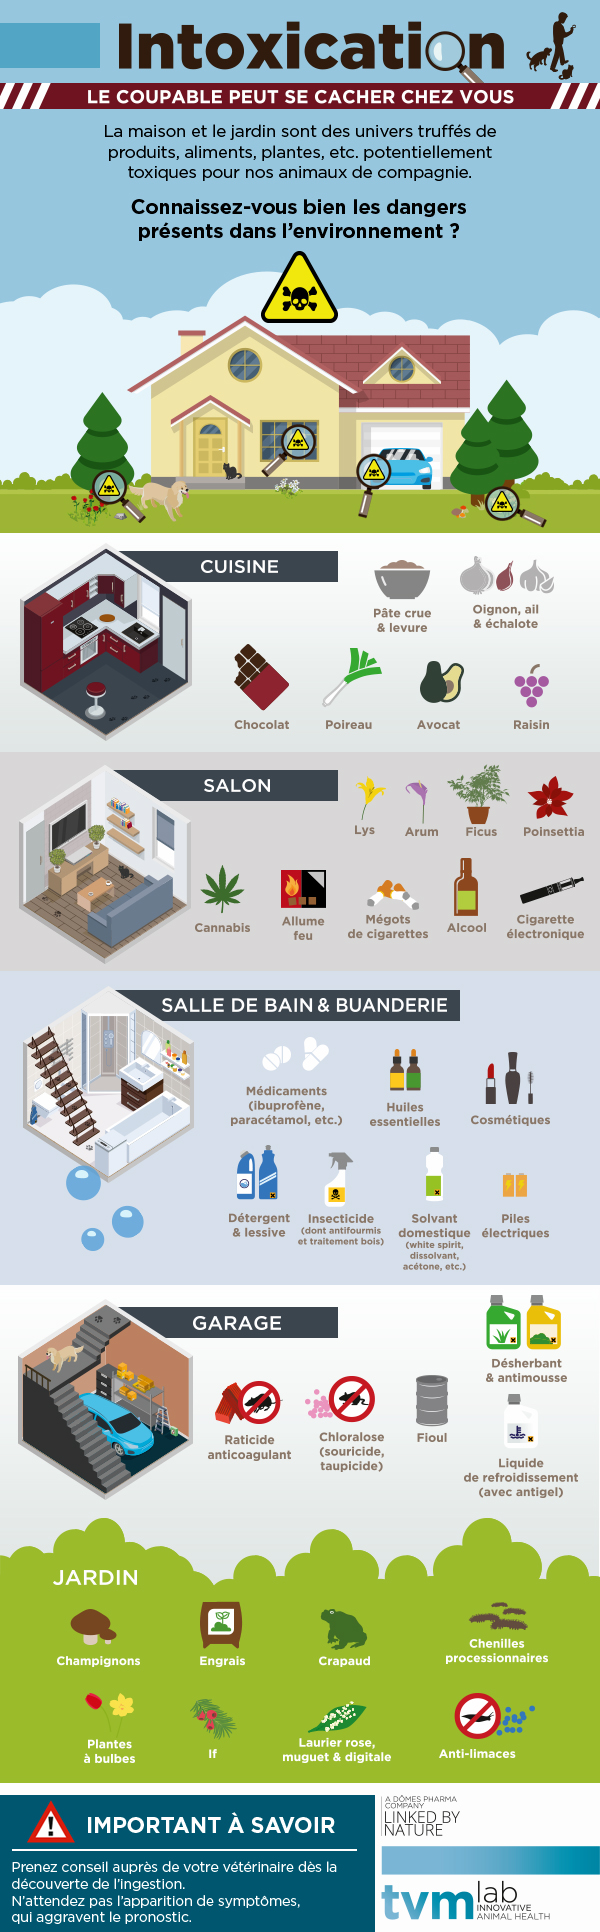 Infographie intoxication